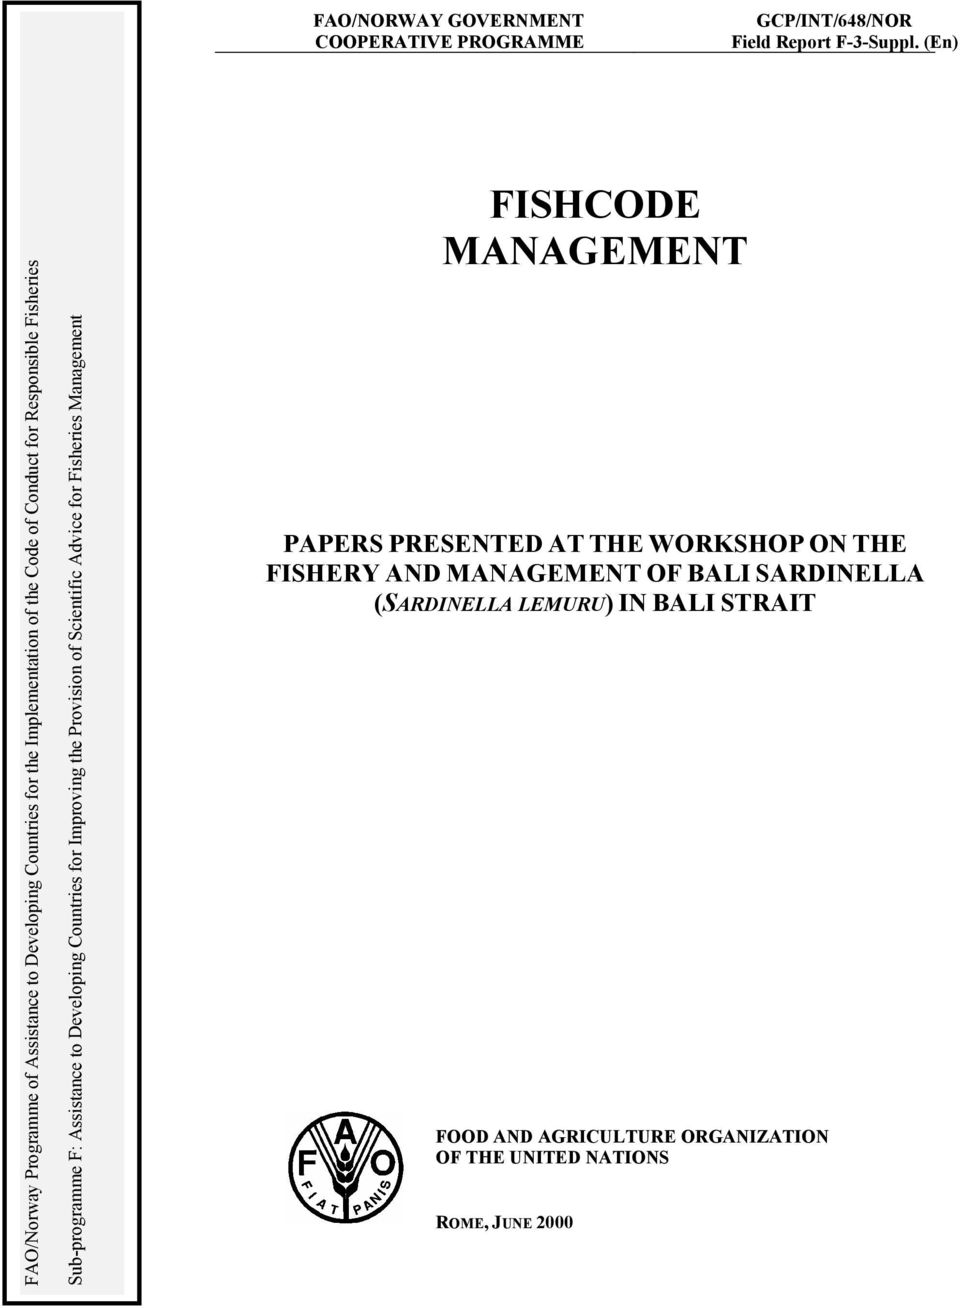 Sub-programme F: Assistance to Developing Countries for Improving the Provision of Scientific Advice for Fisheries Management FISHCODE